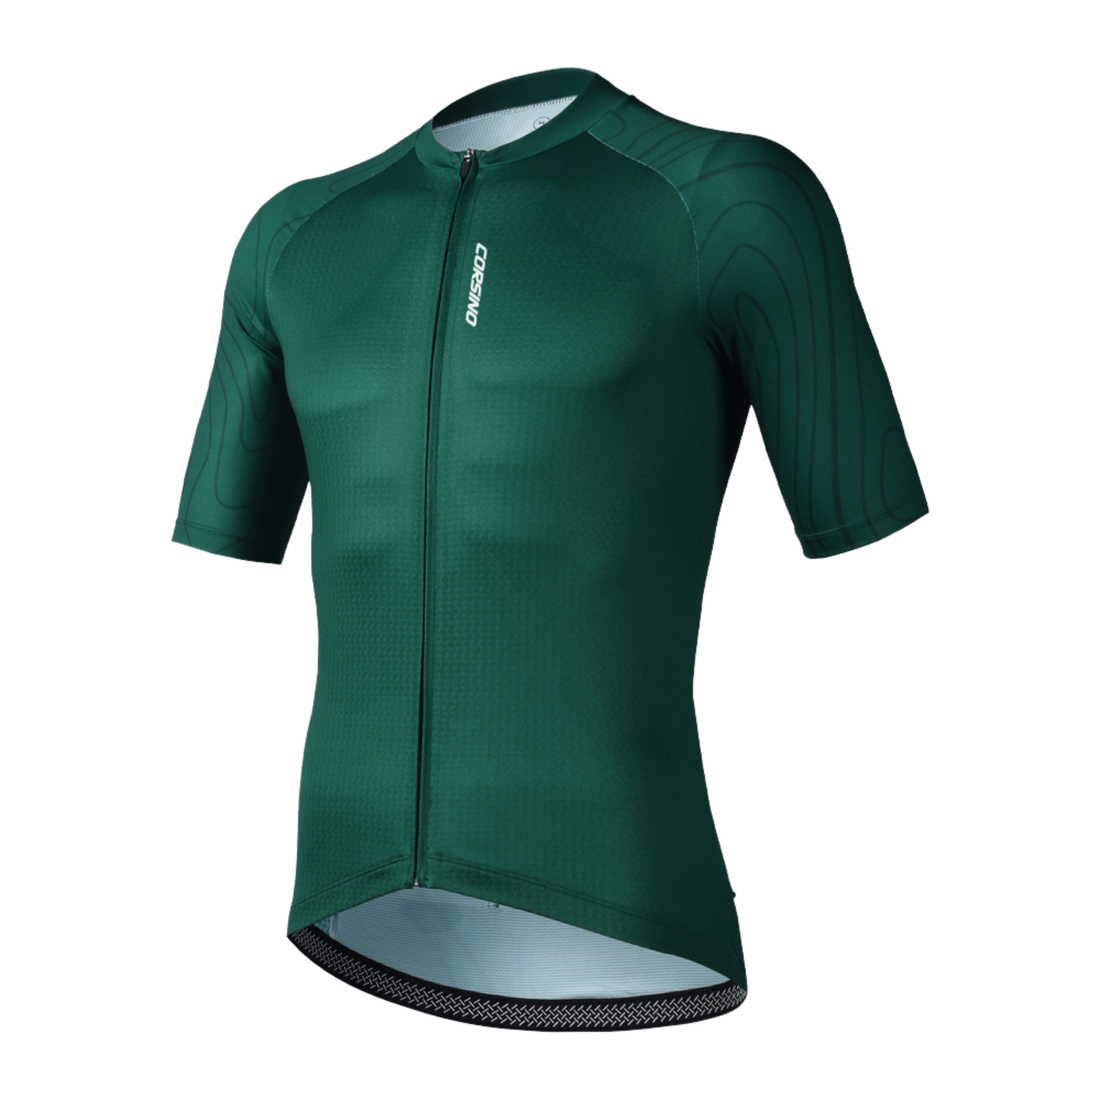 Front view of the Corsino Venice women's dark green short sleeve cycling jersey.